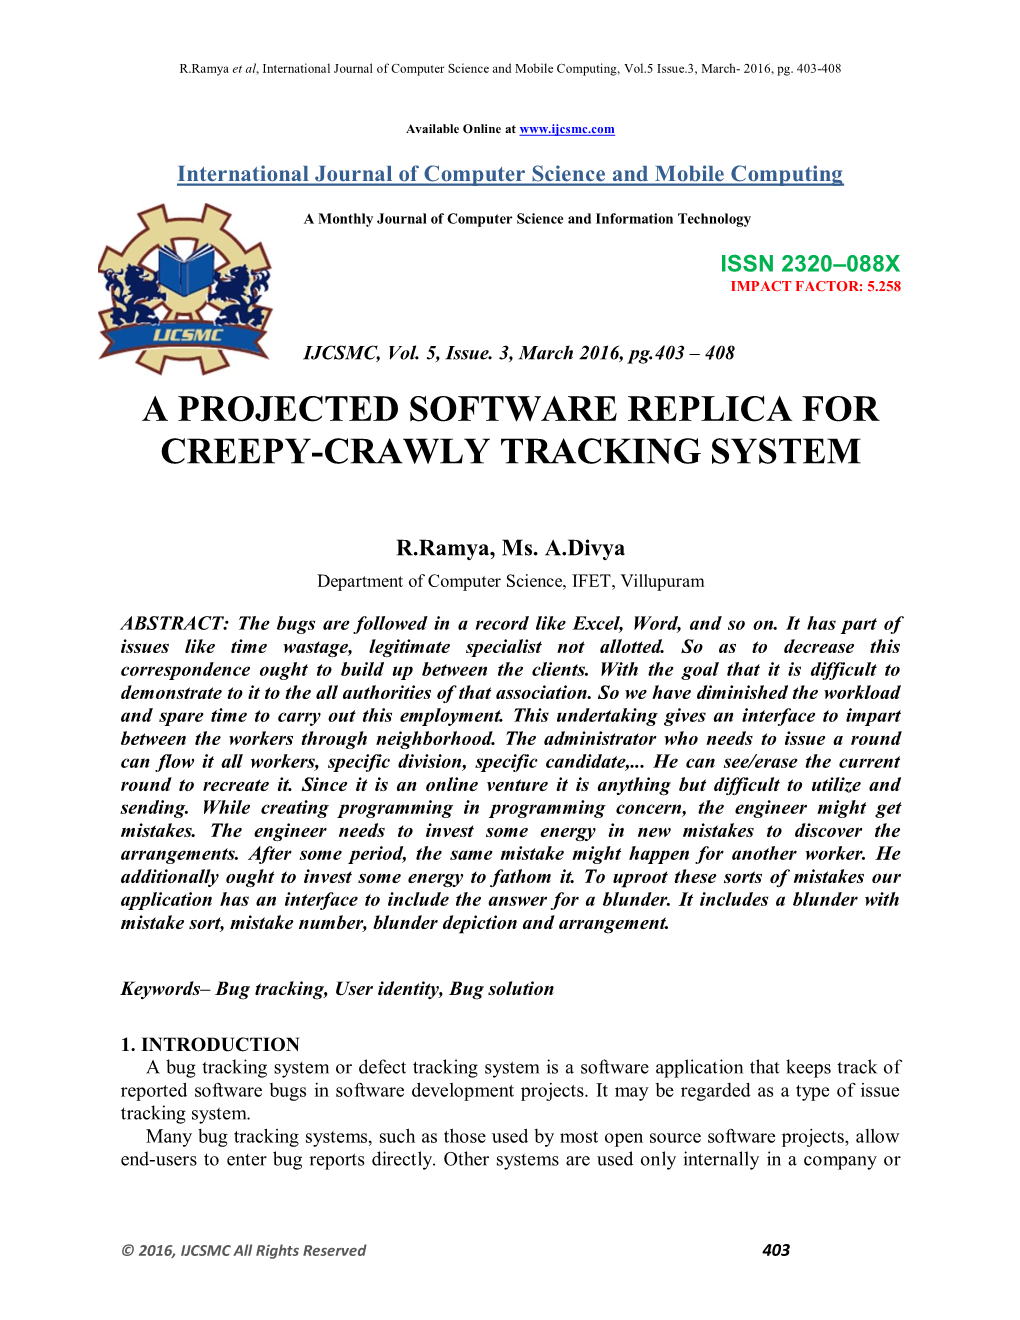 A Projected Software Replica for Creepy-Crawly Tracking System